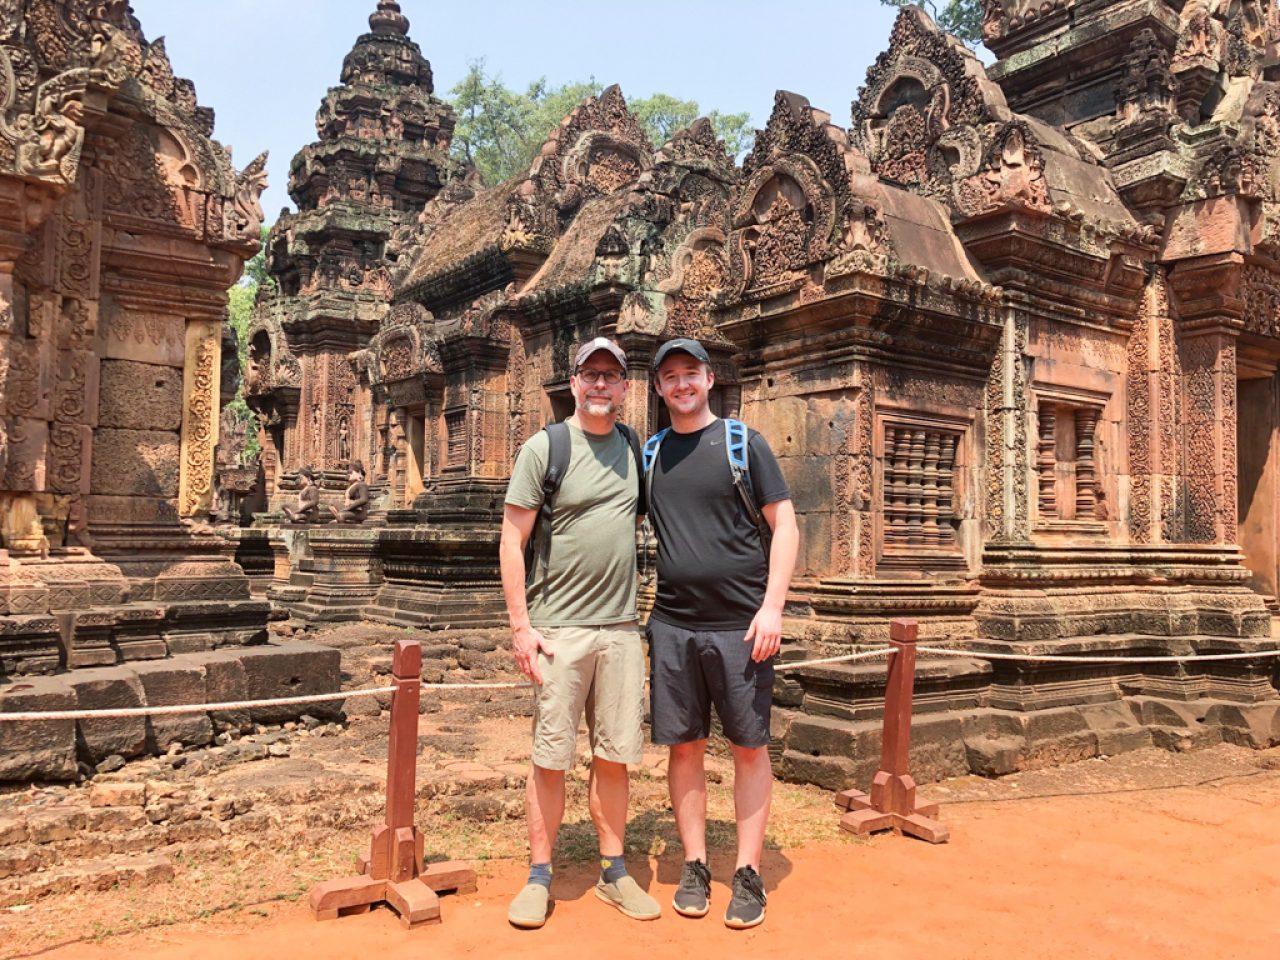 2 men standing in front of monuments in Angkor Wat, Cambodia